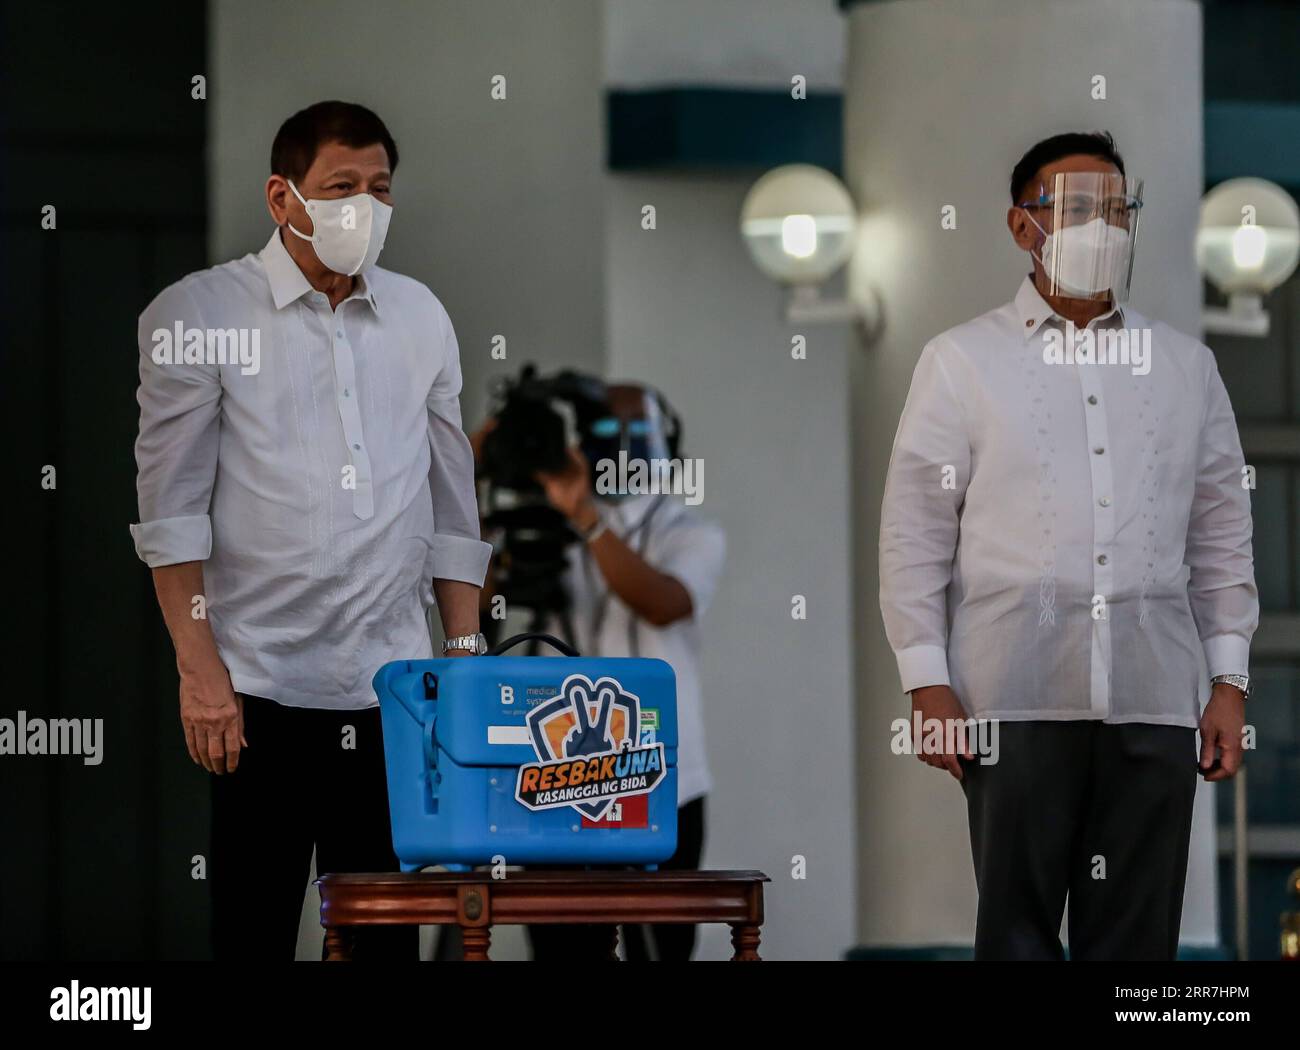 210329 -- MANILA, March 29, 2021 -- Philippine President Rodrigo Duterte L stands beside Health Secretary Francisco Duque as they present a case containing government-purchased Sinovac COVID-19 vaccines in Manila, the Philippines, on March 29, 2021. The Philippines on Monday received the first batch of the Sinovac COVID-19 vaccines its government has purchased from China.  PHILIPPINES-MANILA-COVID-19-SINOVAC-VACCINE-ARRIVAL RouellexUmali PUBLICATIONxNOTxINxCHN Stock Photo